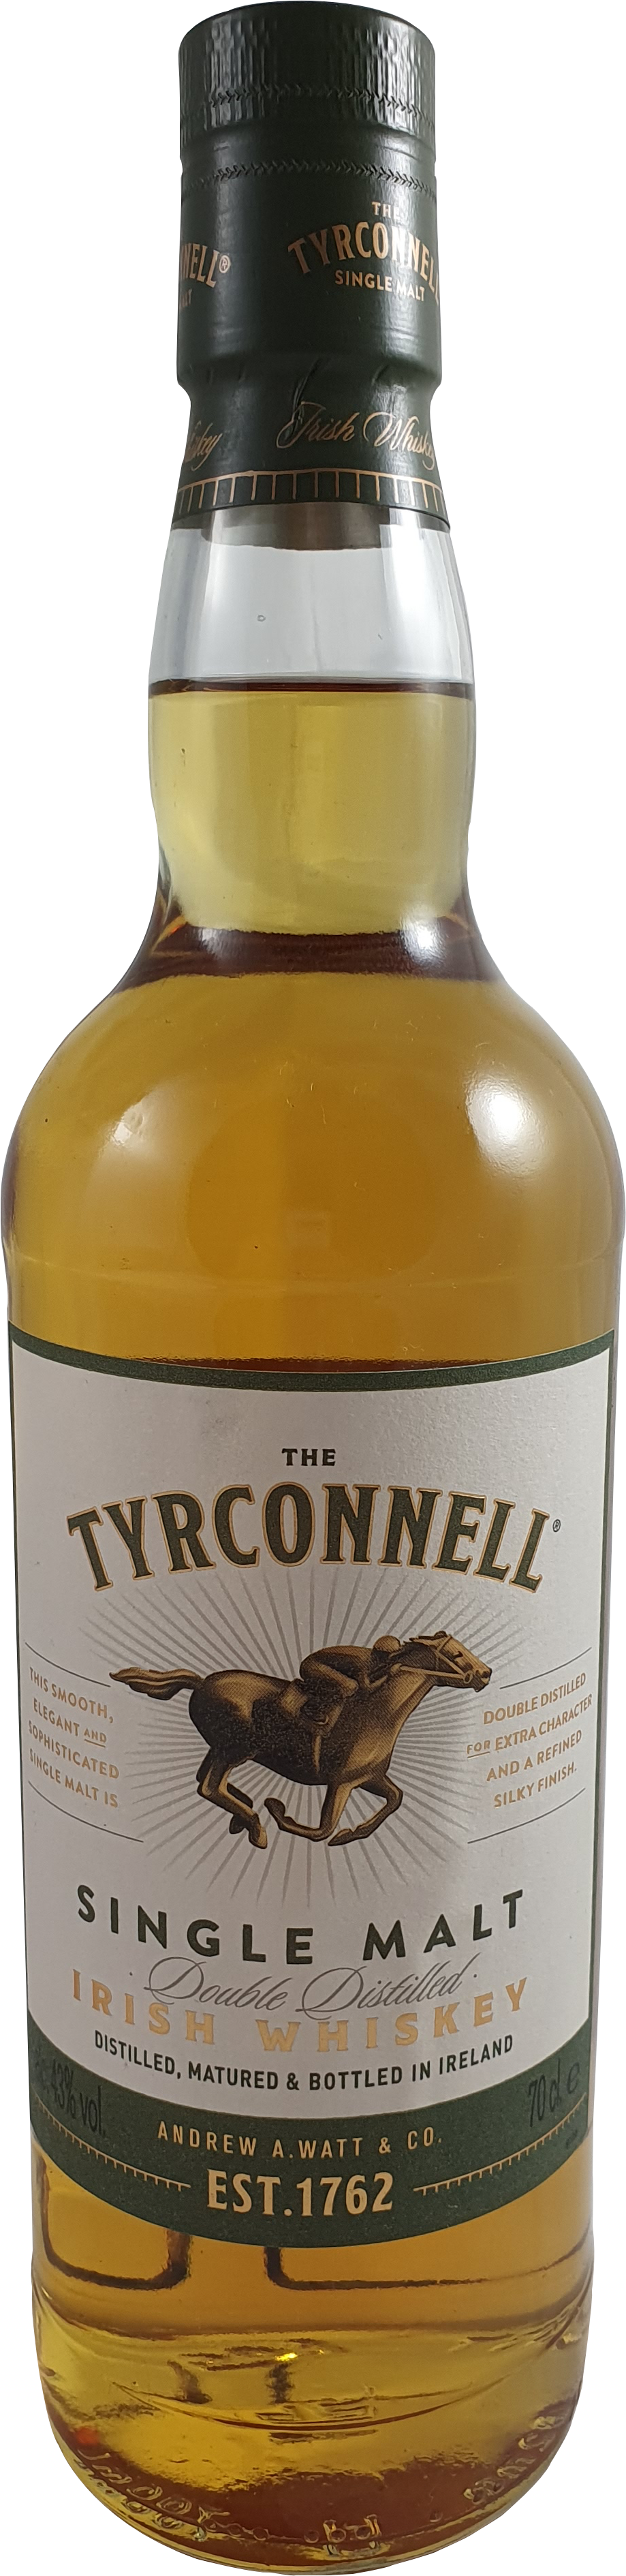 Tyrconnell Double Dist. Irish Whiskey 43% 0.7L